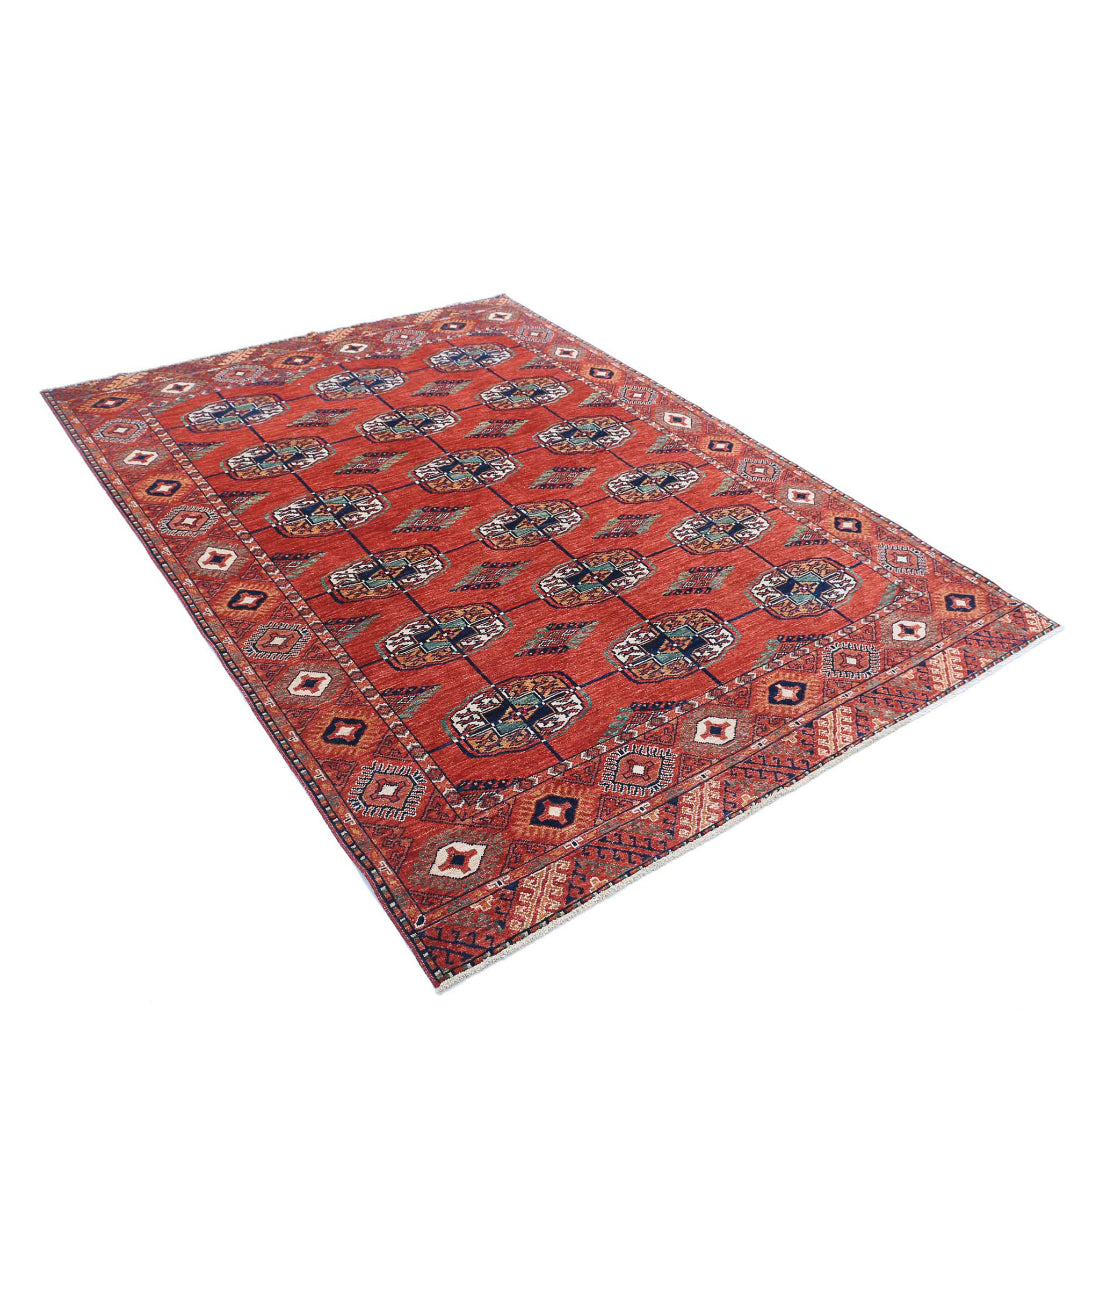 Hand Knotted Nomadic Caucasian Humna Wool Rug - 5'8'' x 7'9'' 5'8'' x 7'9'' (170 X 233) / Rust / Blue